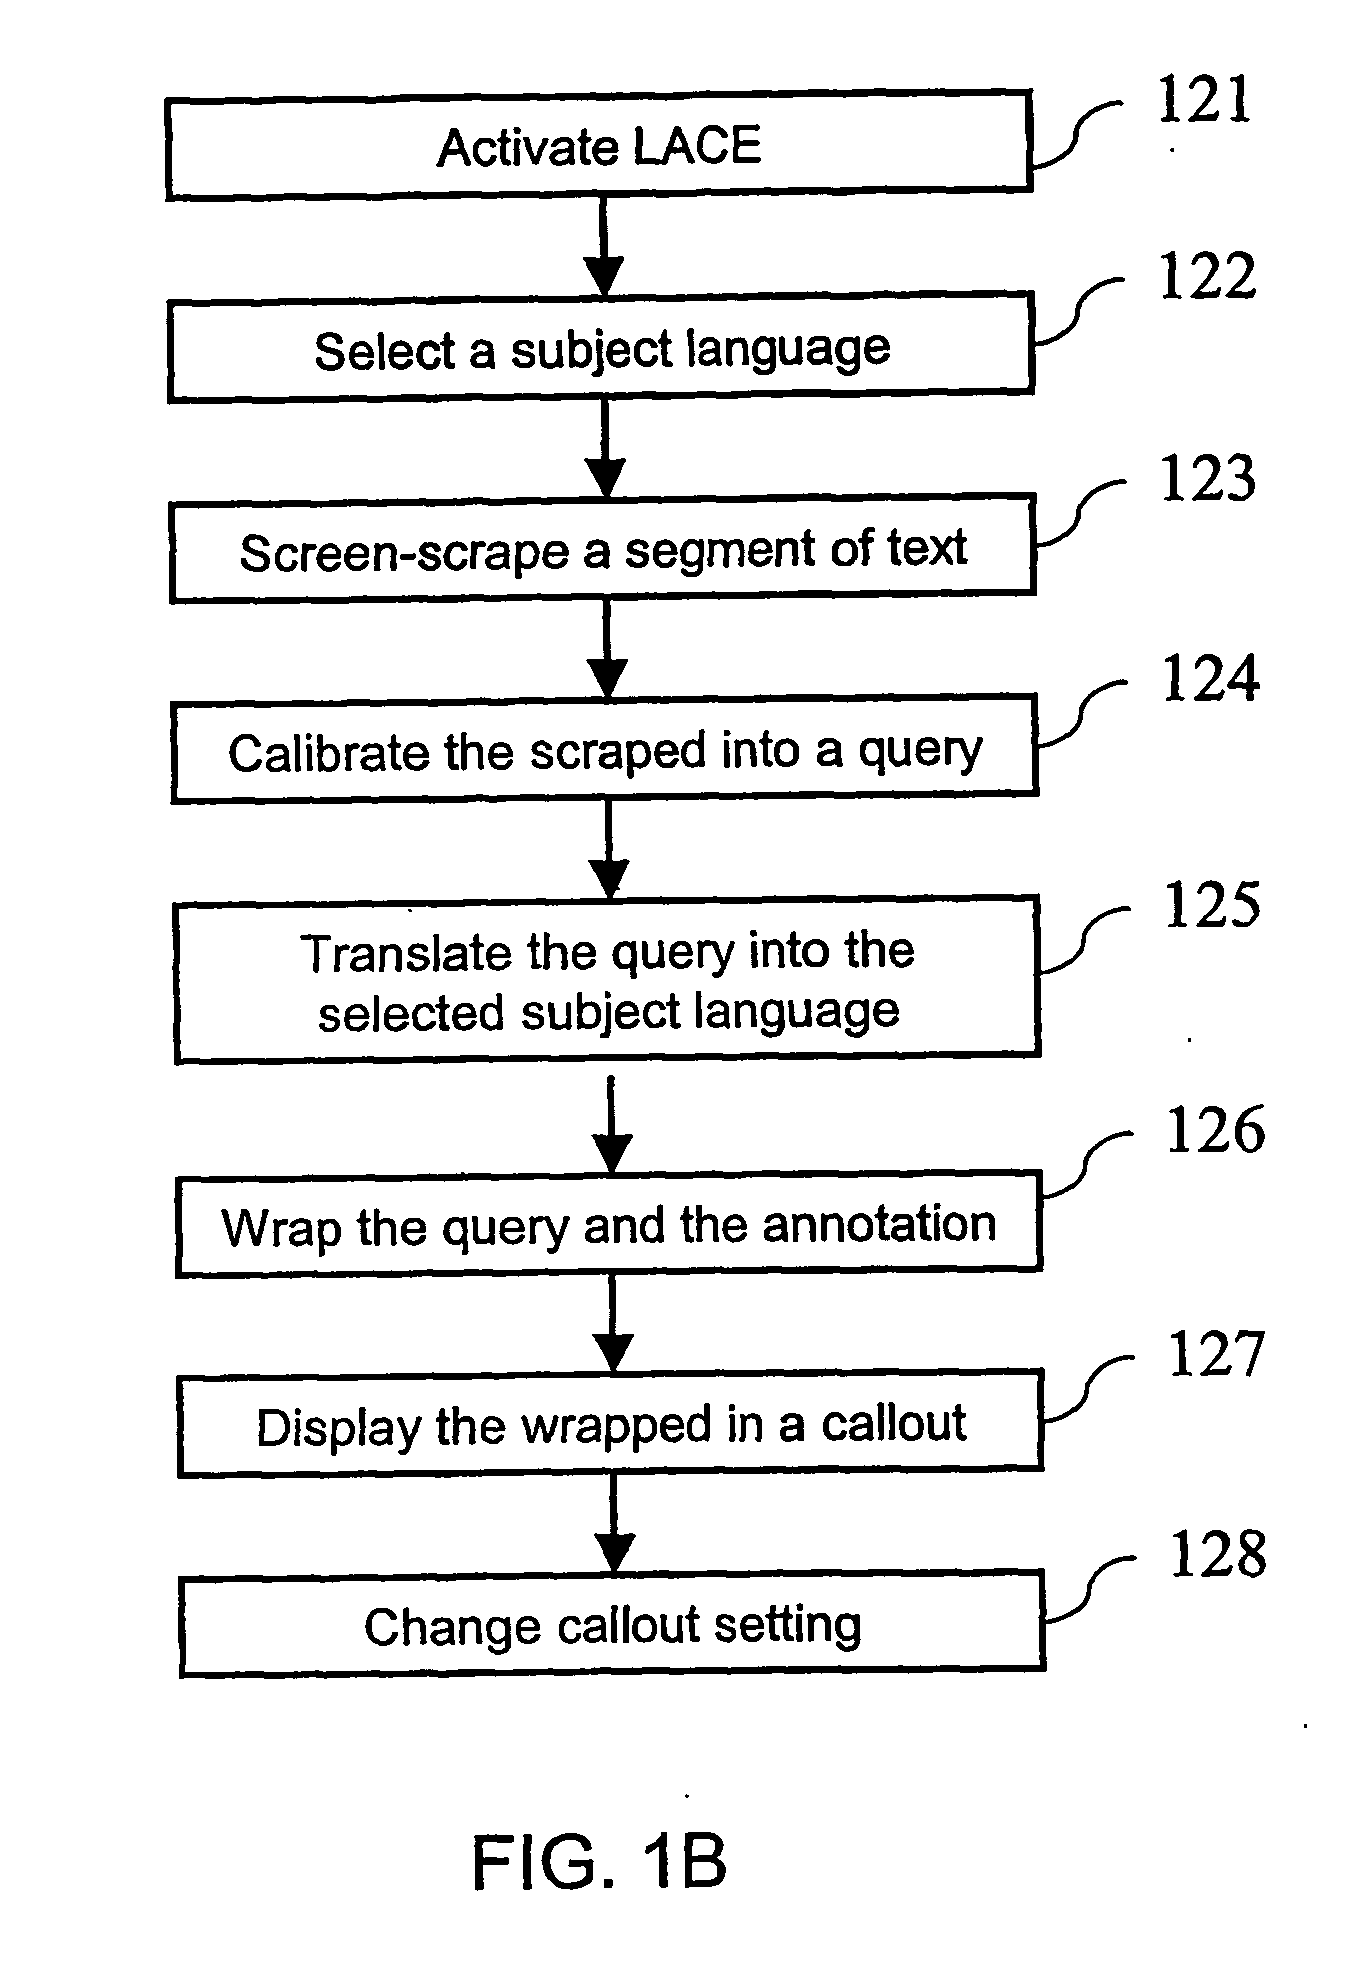 Pointer initiated instant bilingual annotation on textual information in an electronic document